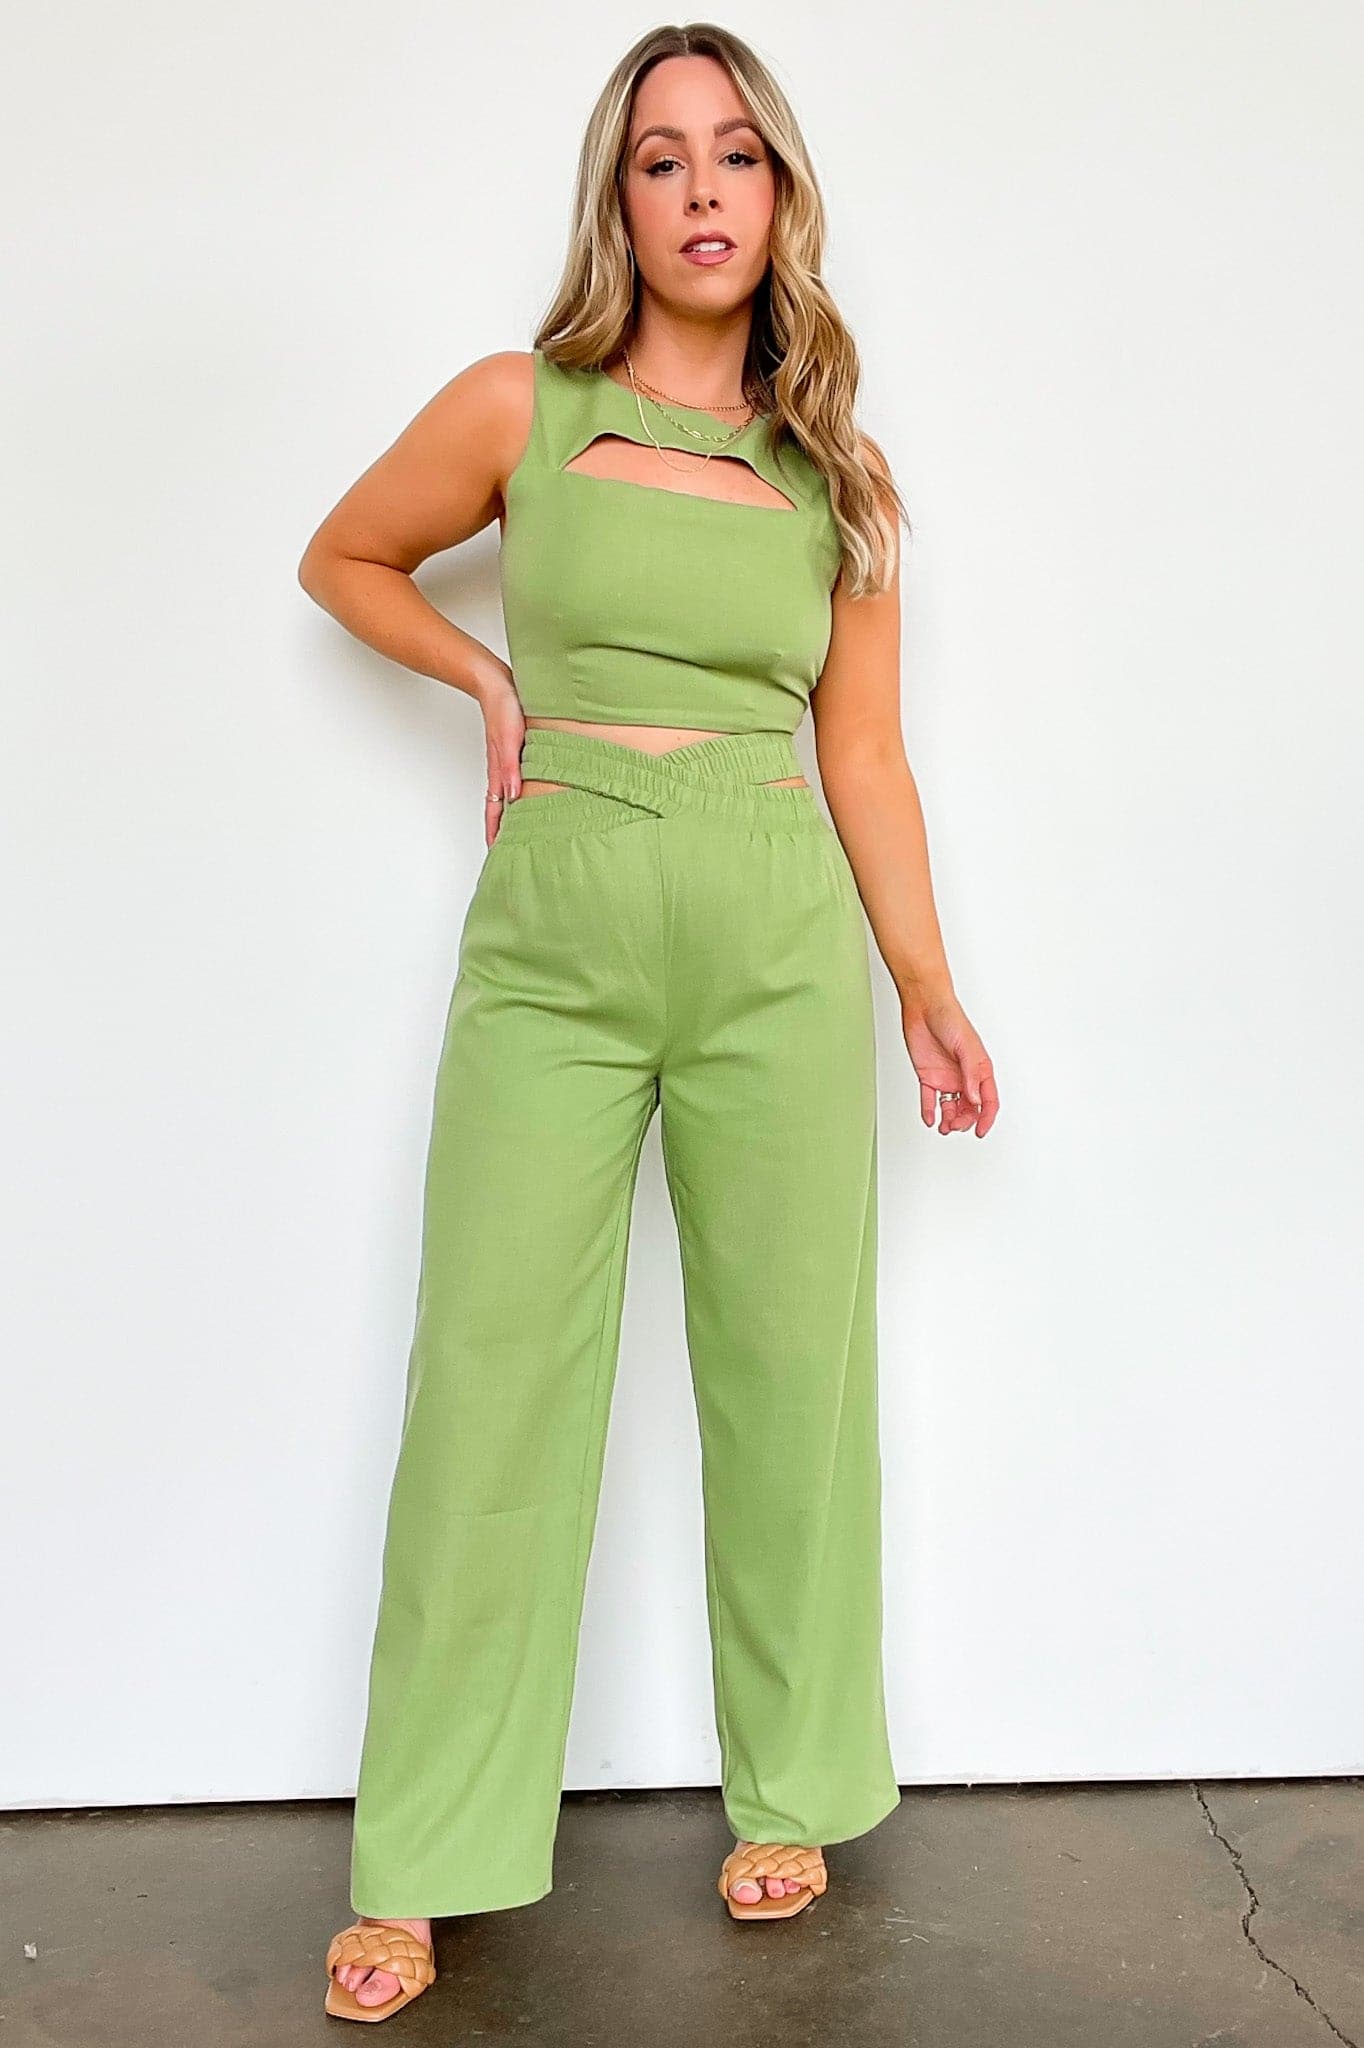  Miami Afternoons Wide Leg Pants - FINAL SALE - Madison and Mallory